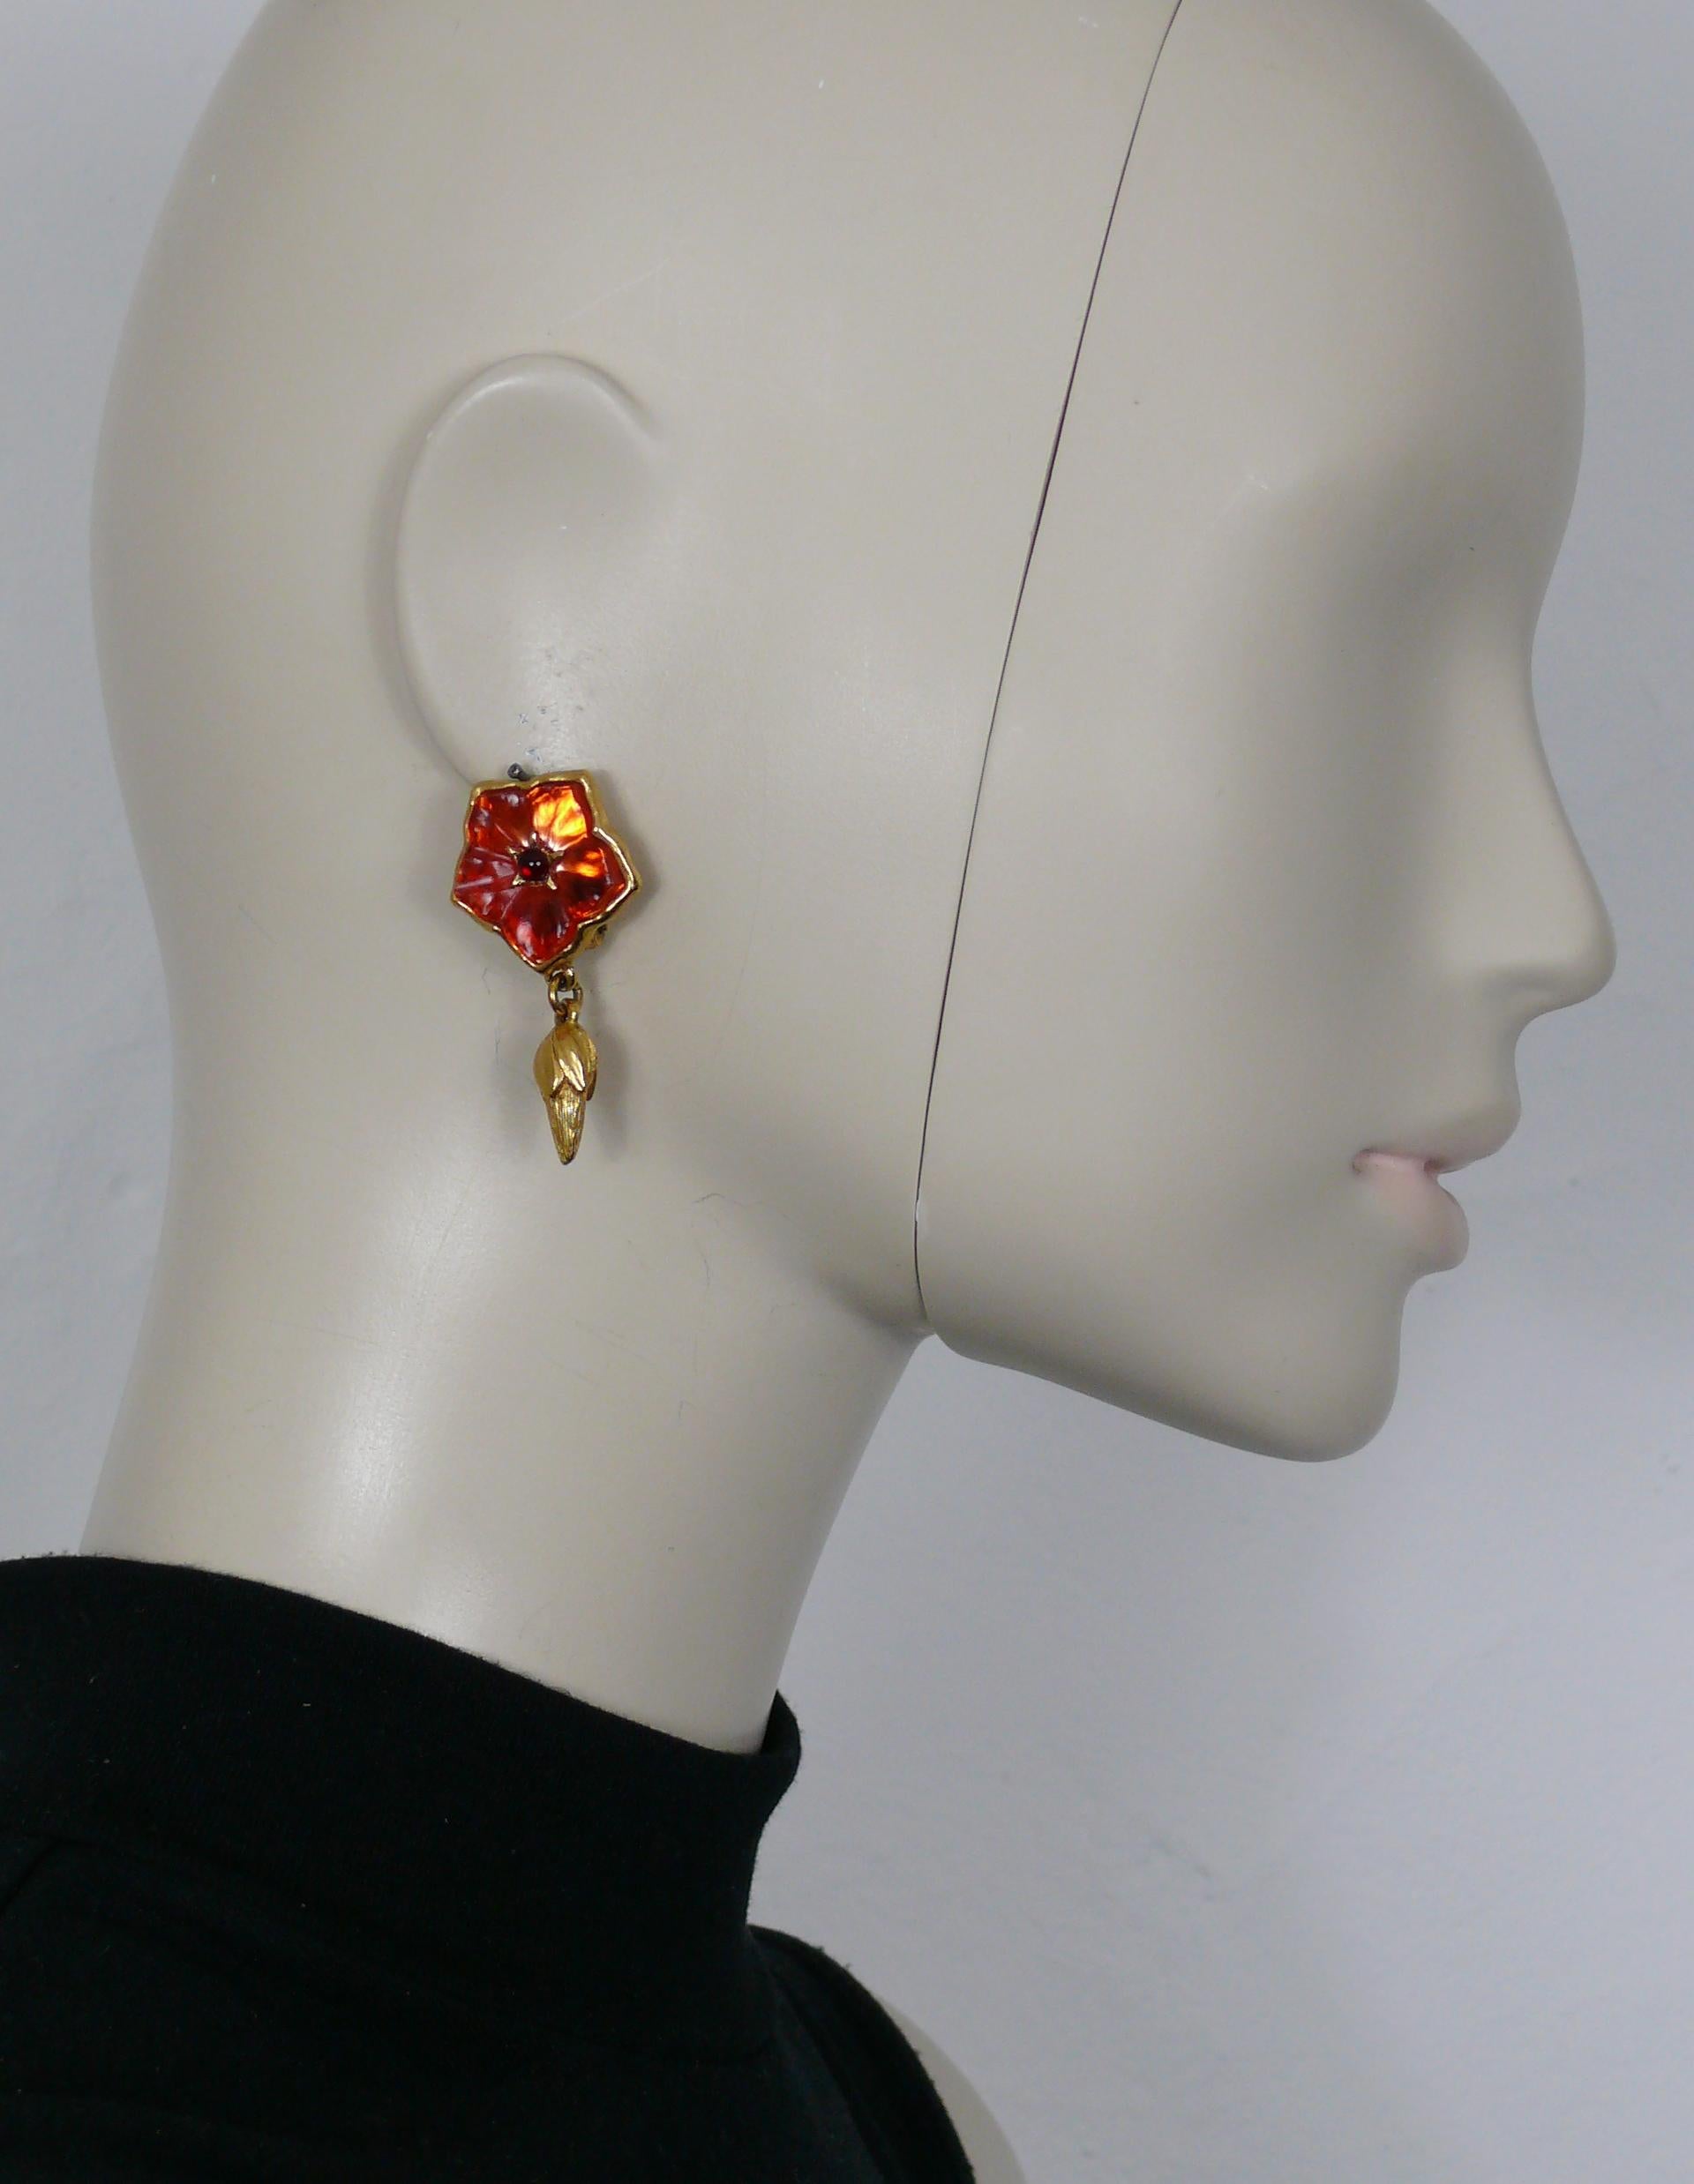 KENZO vintage gold tone dangling earrings (clip-on) featuring an orange resin flower.

Embossed KENZO Paris Made in France.

Indicative measurements : height approx. 4.6 cm (1.81 inches) / max. width approx. 2.3 cm (0.91 inch).

Weight per earring :